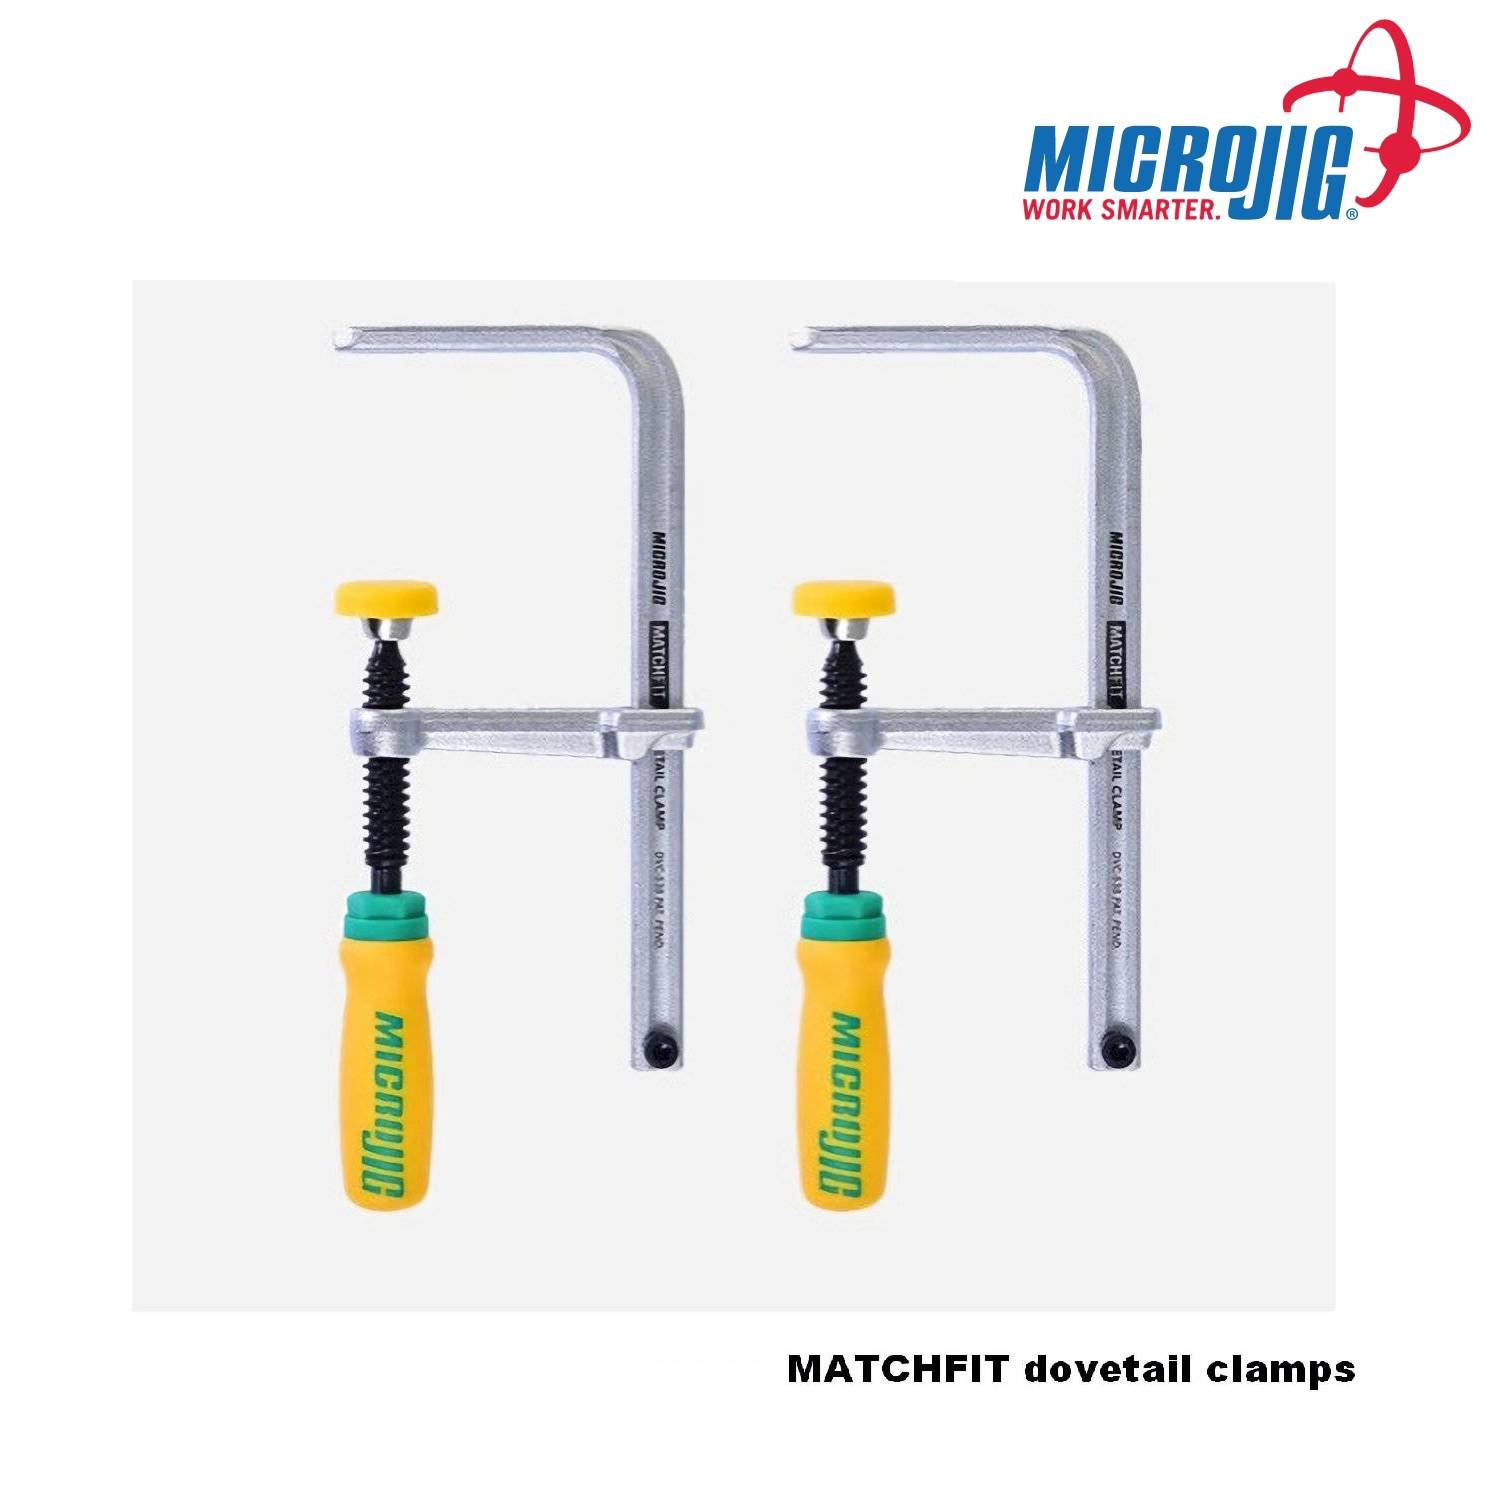 matchfit-dovetail-clamps-microjig